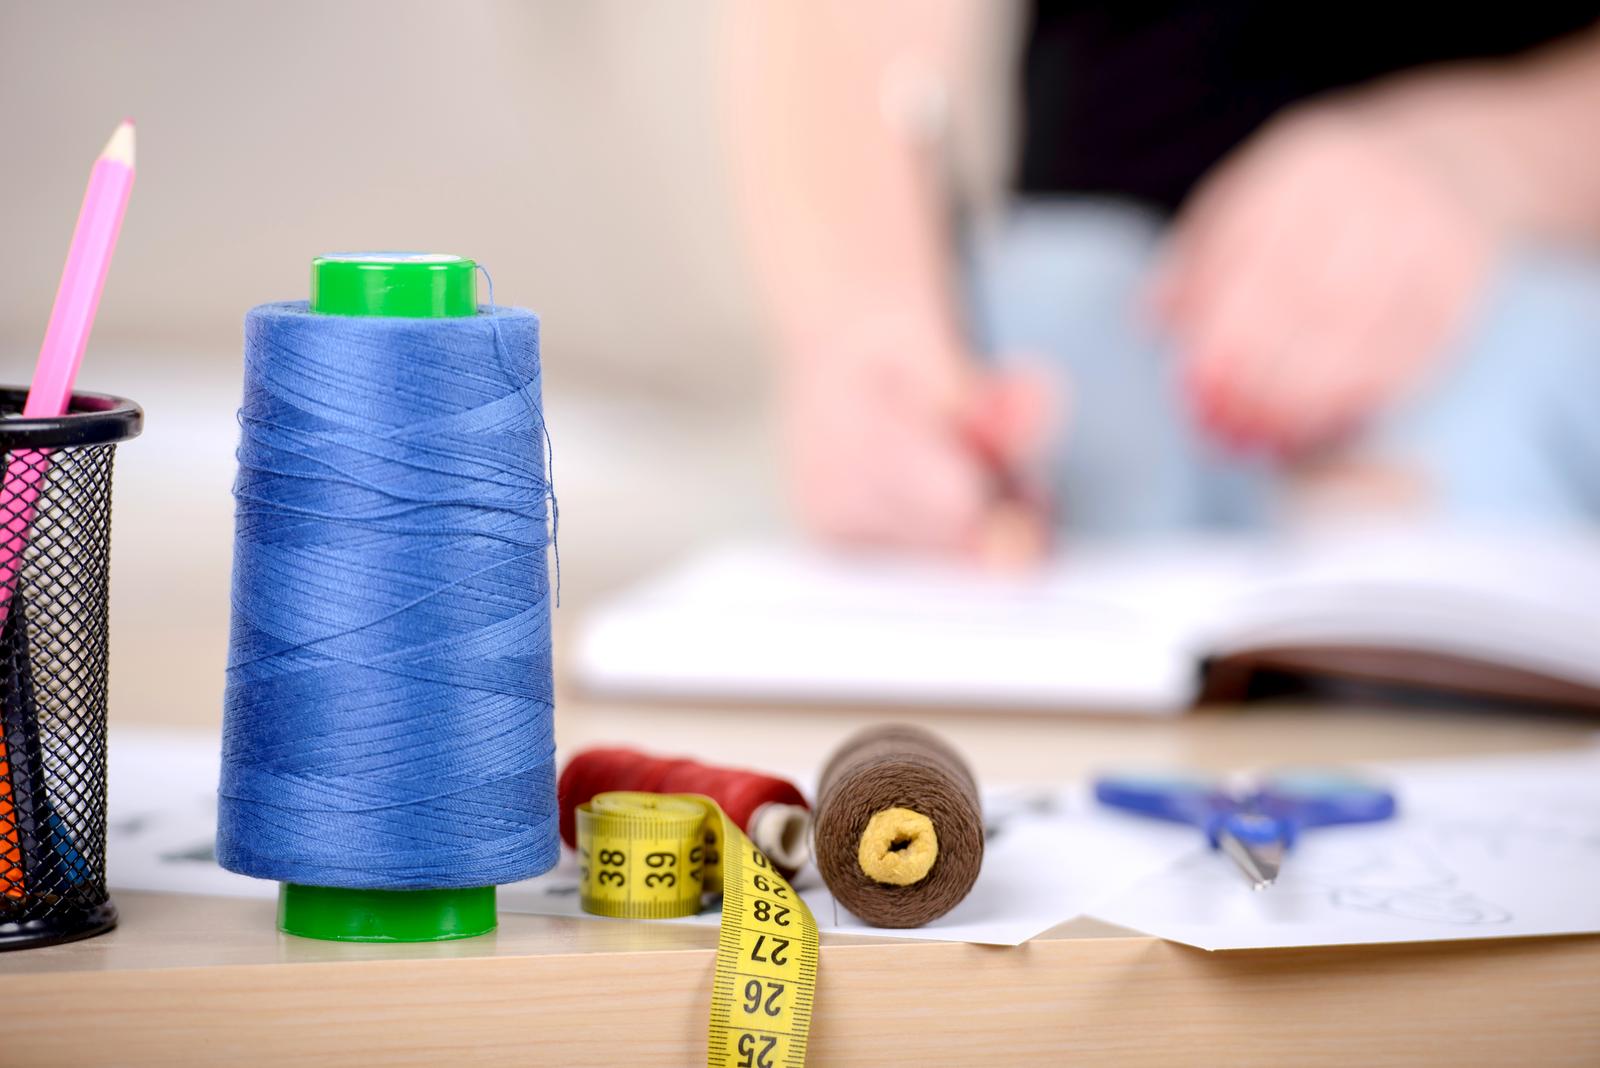 CENTERFORS OÜ - Sewing products and other related services, products, consultations